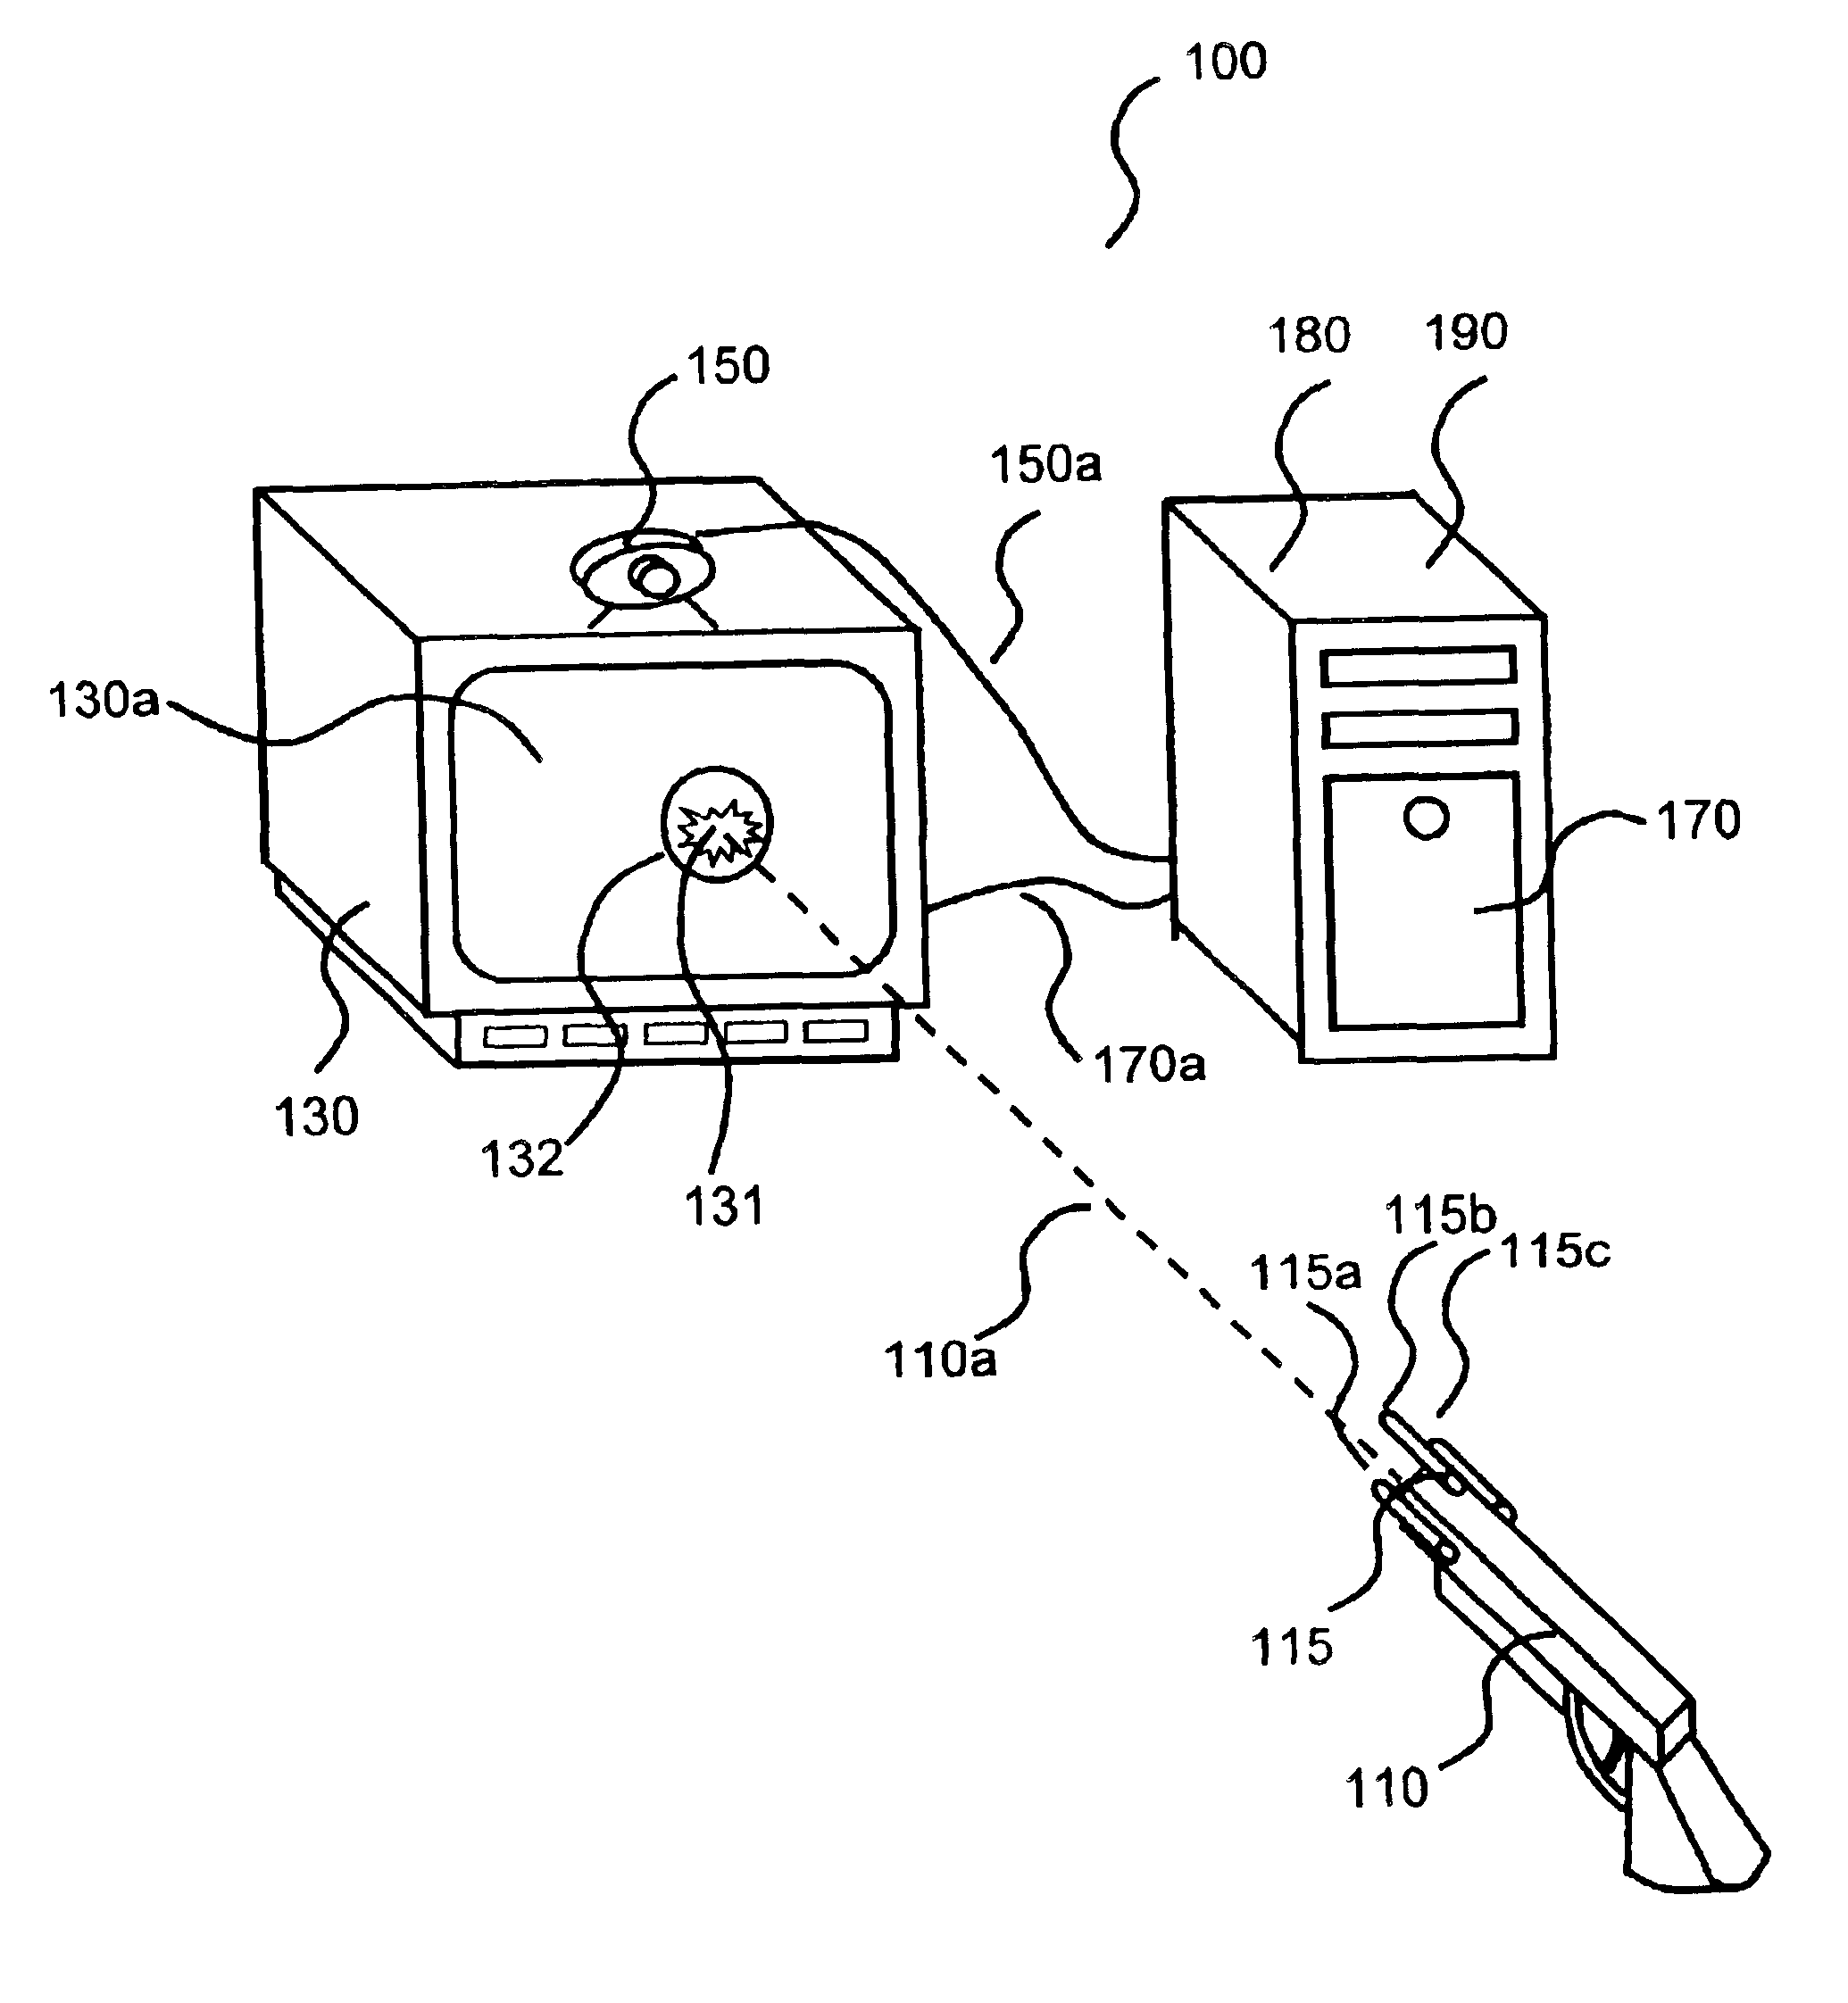 Apparatus and a method for more realistic shooting video games on computers or similar devices